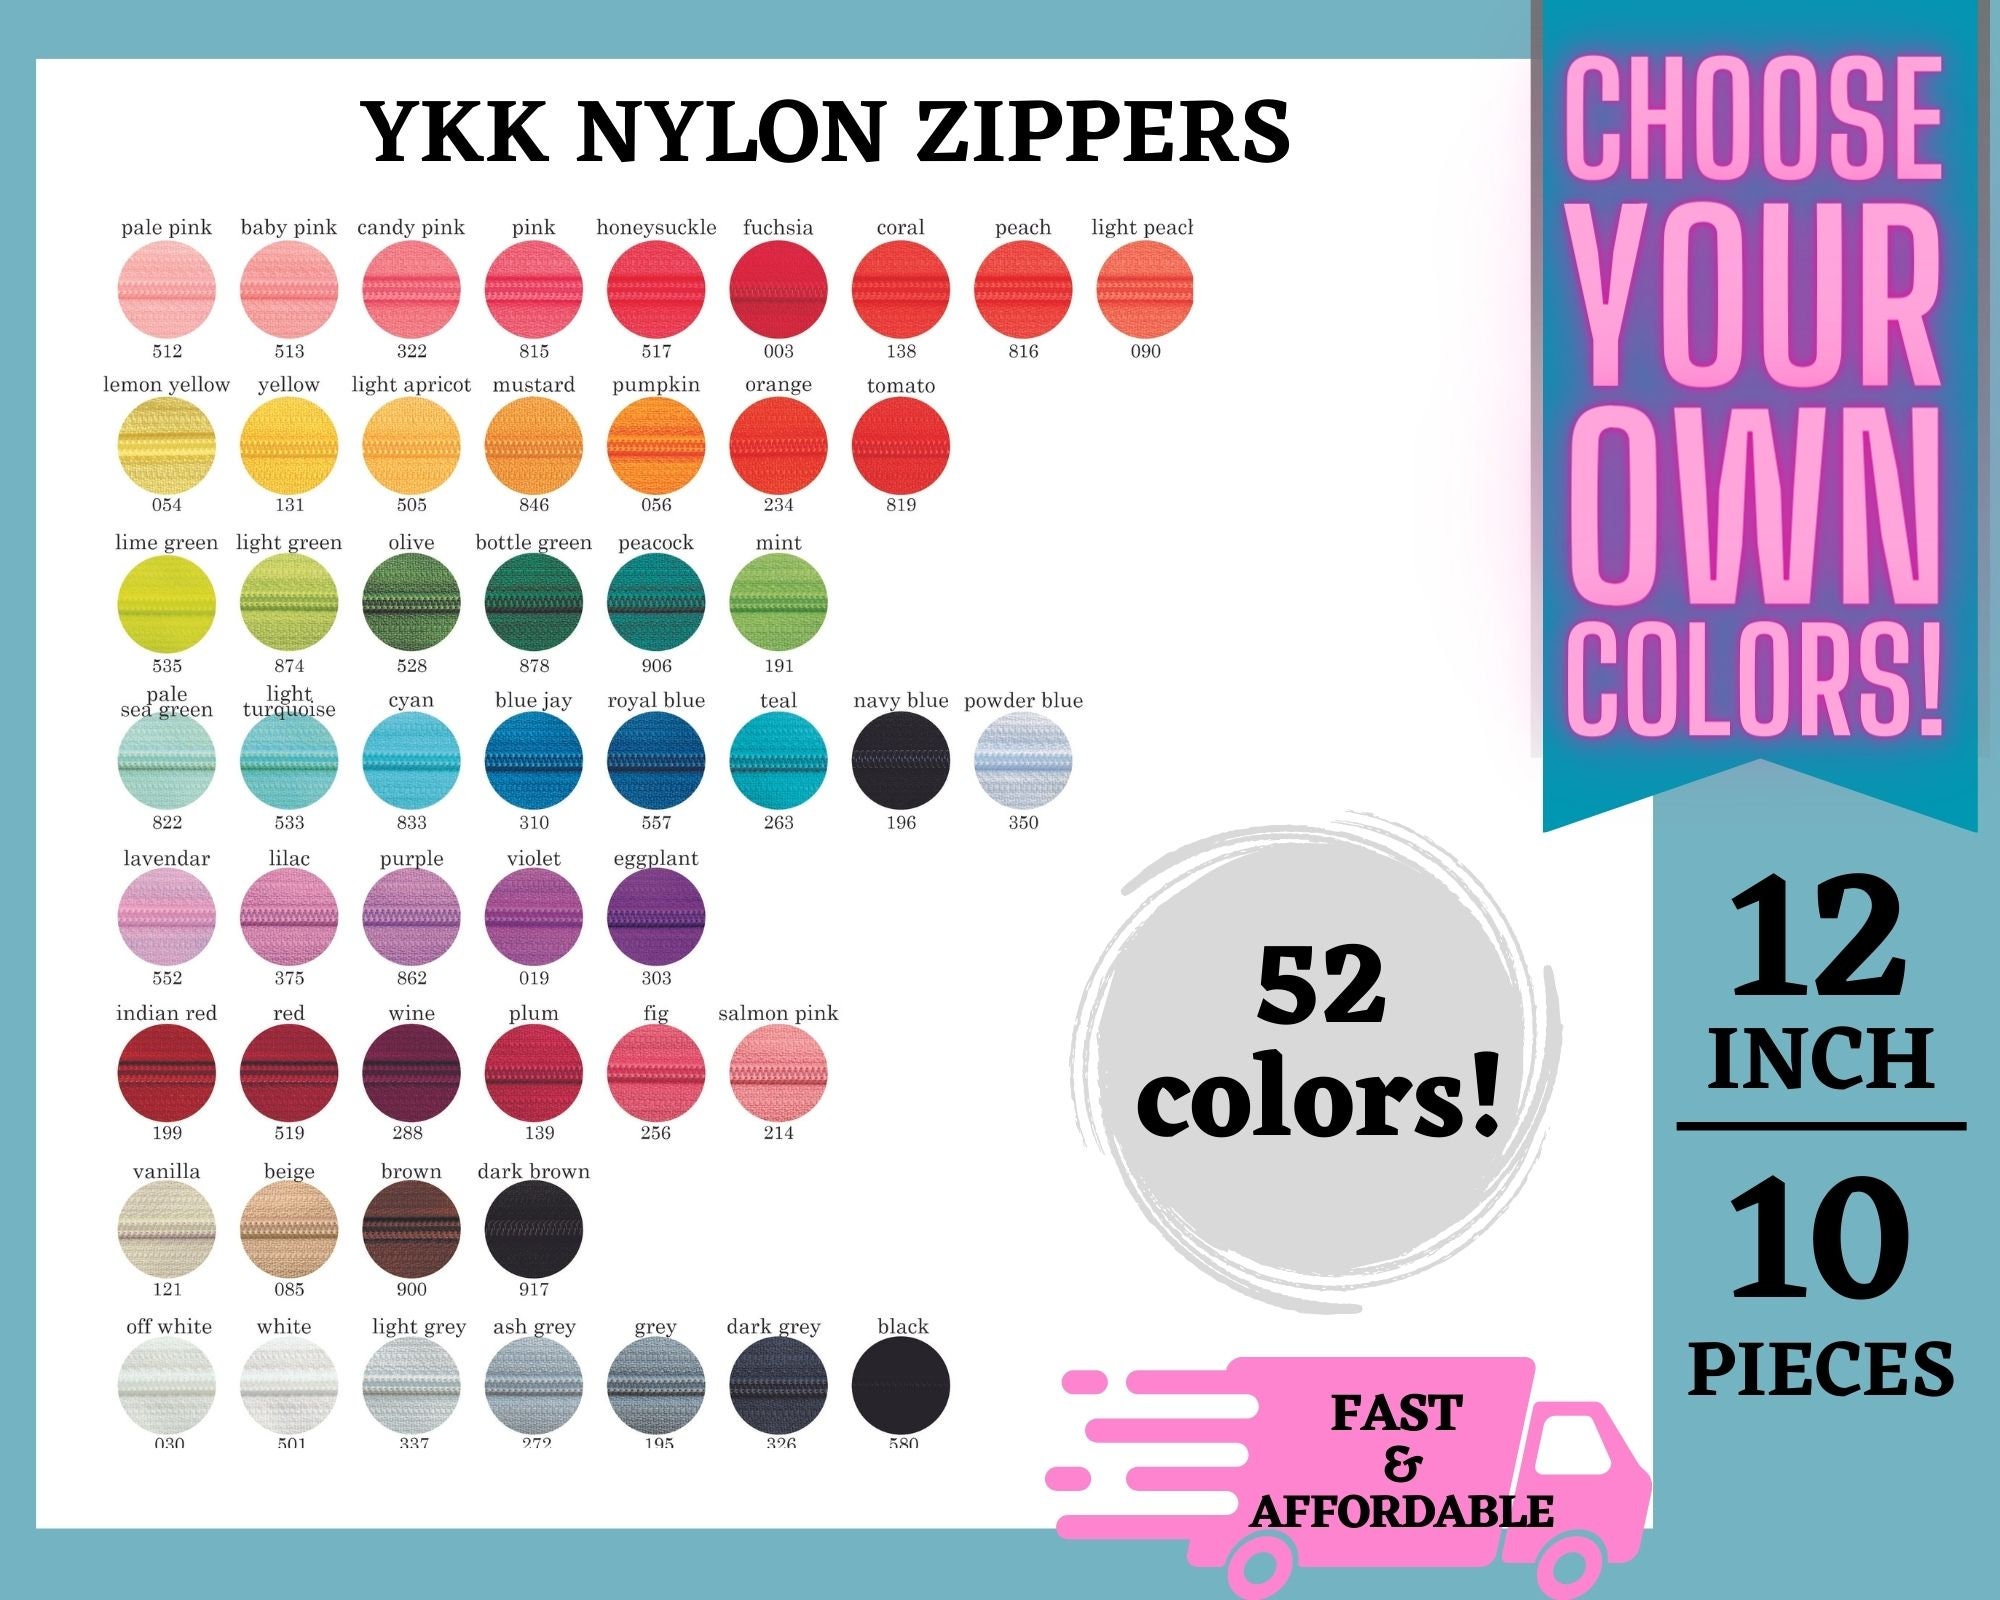 12 Inch YKK Zippers, Choose Any 10, 3 Nylon Coil, Mix and Match